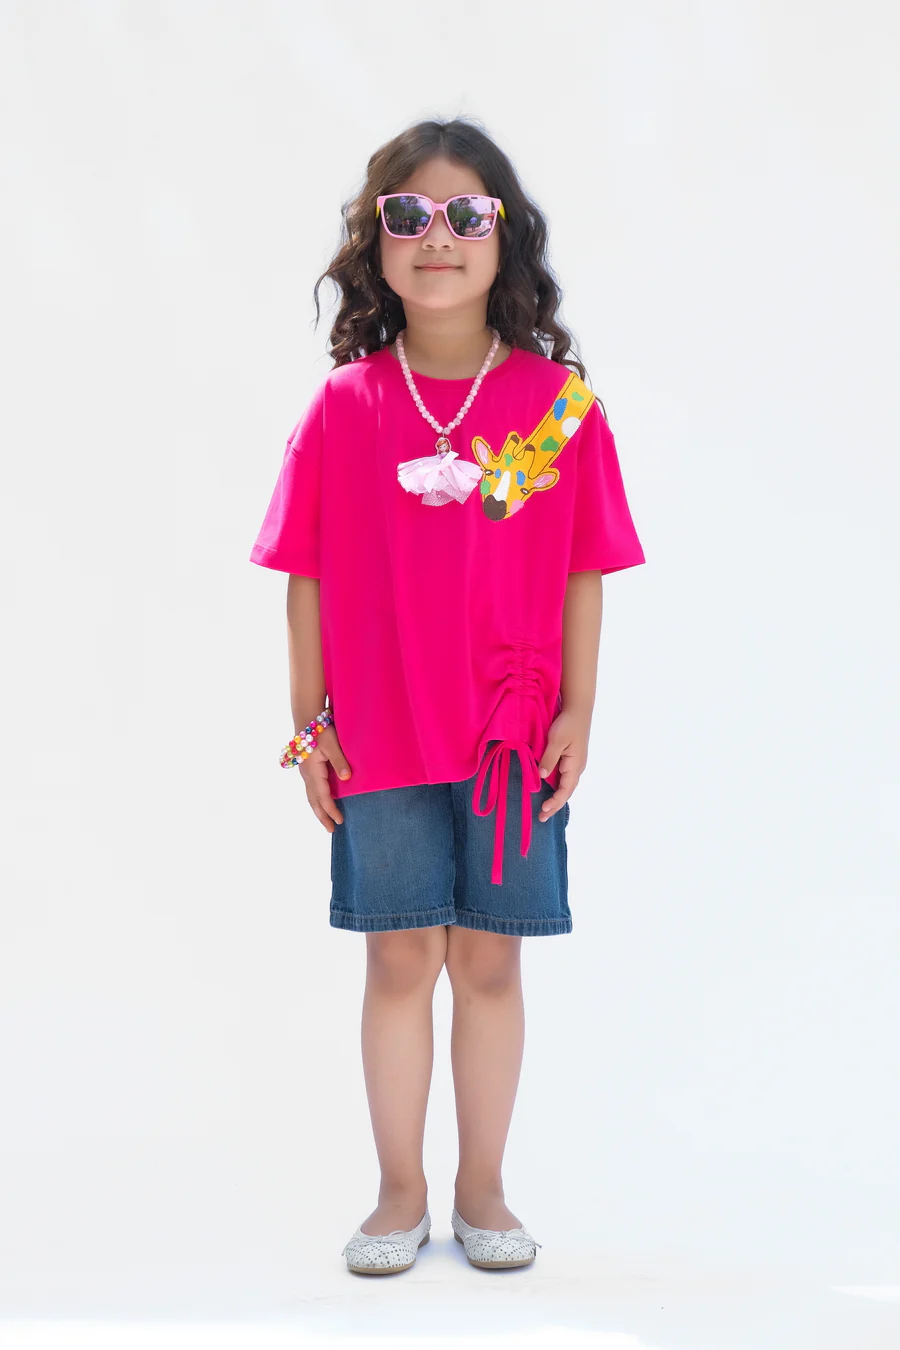 Giraffe With Embroidery - Half Sleeves T-Shirts For Kids - Dark Pink - SBT-365